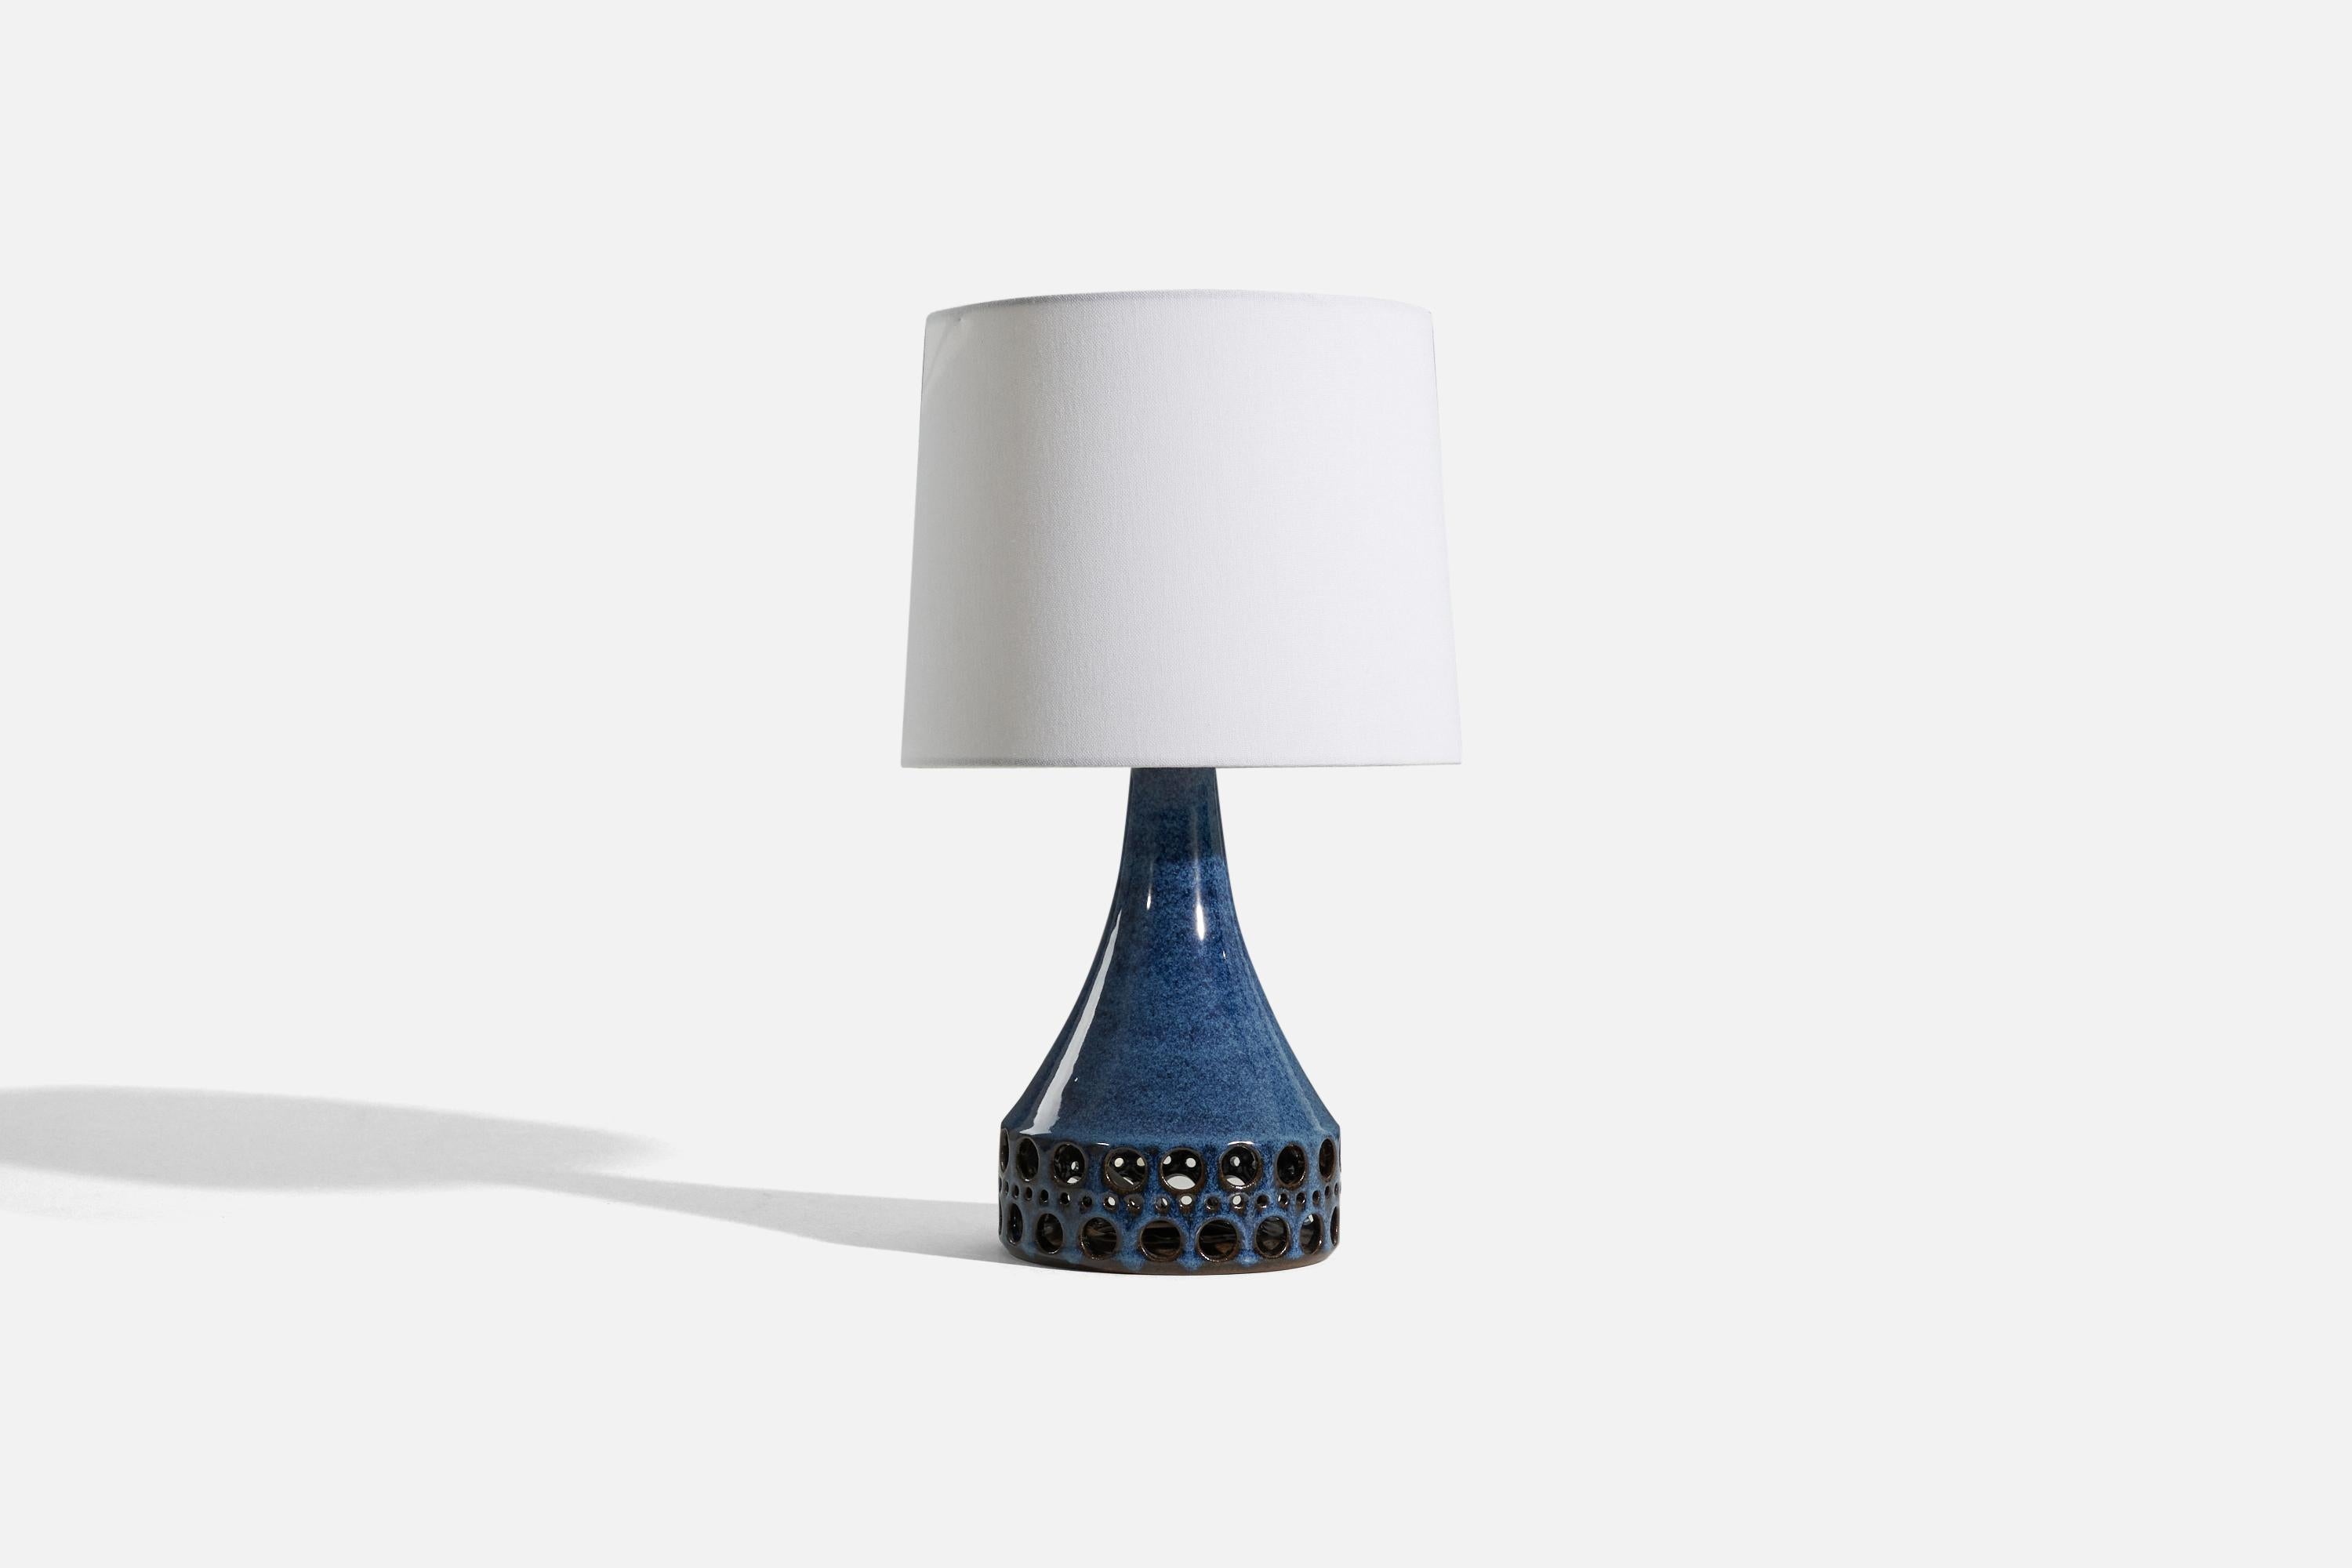 A blue stoneware table lamp designed by Marianne Starck, and produced by Michael Andersen Keramik, Denmark, 1960s. 

Sold without lampshade. 
Dimensions of Lamp (inches) : 12.4375 x 6.125 x 6.125 (H x W x D)
Dimensions of Shade (inches) : 9 x 10